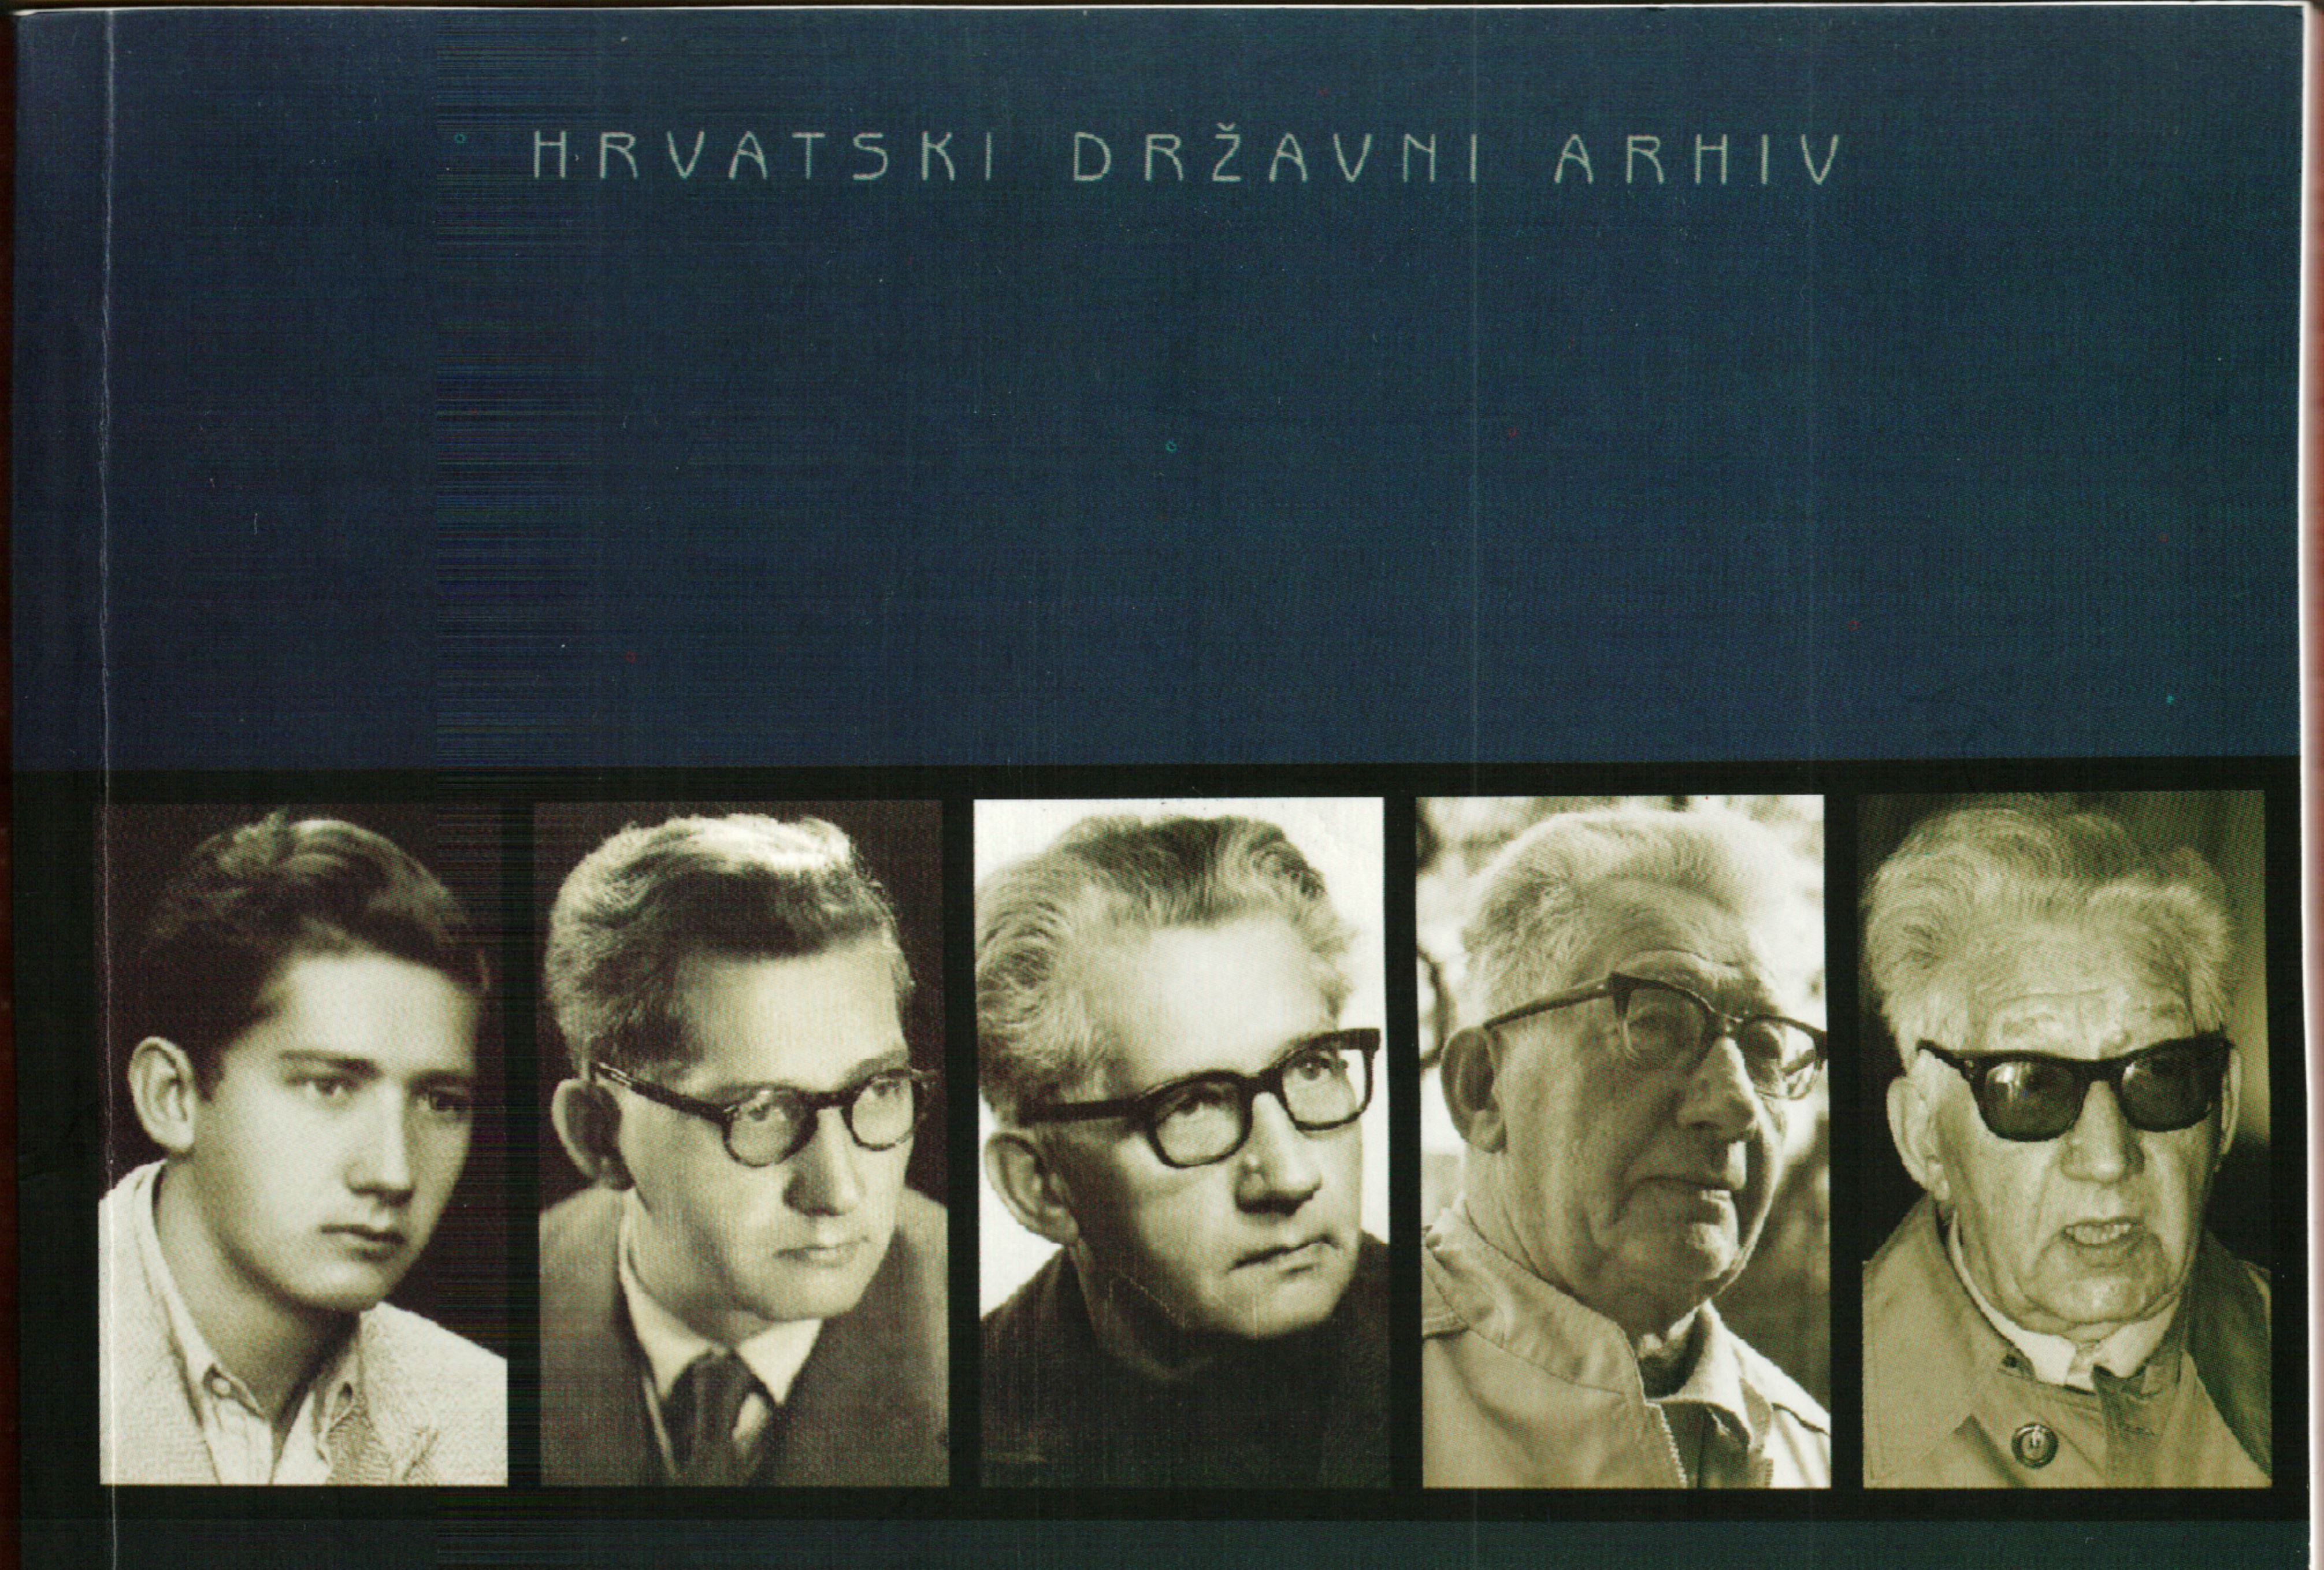 Part of the cover of the book Personal Archival Fund Rudi Supek: Analytical Inventory (Zagreb: Croatian State Archives, 2010), by Marijan Bosnar.